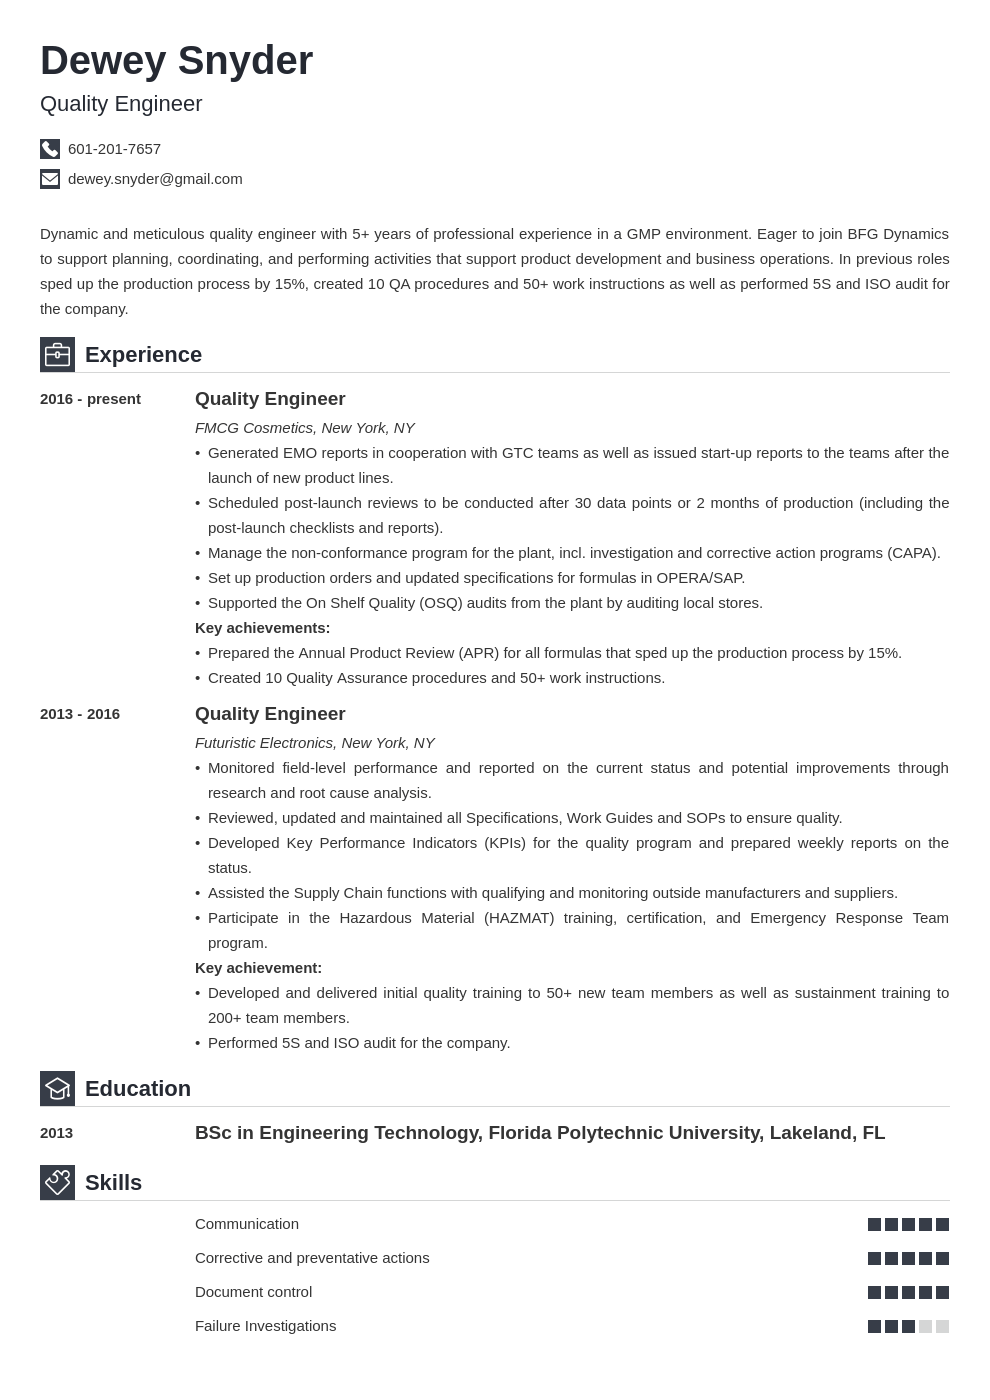 Best resume format for purchase engineer